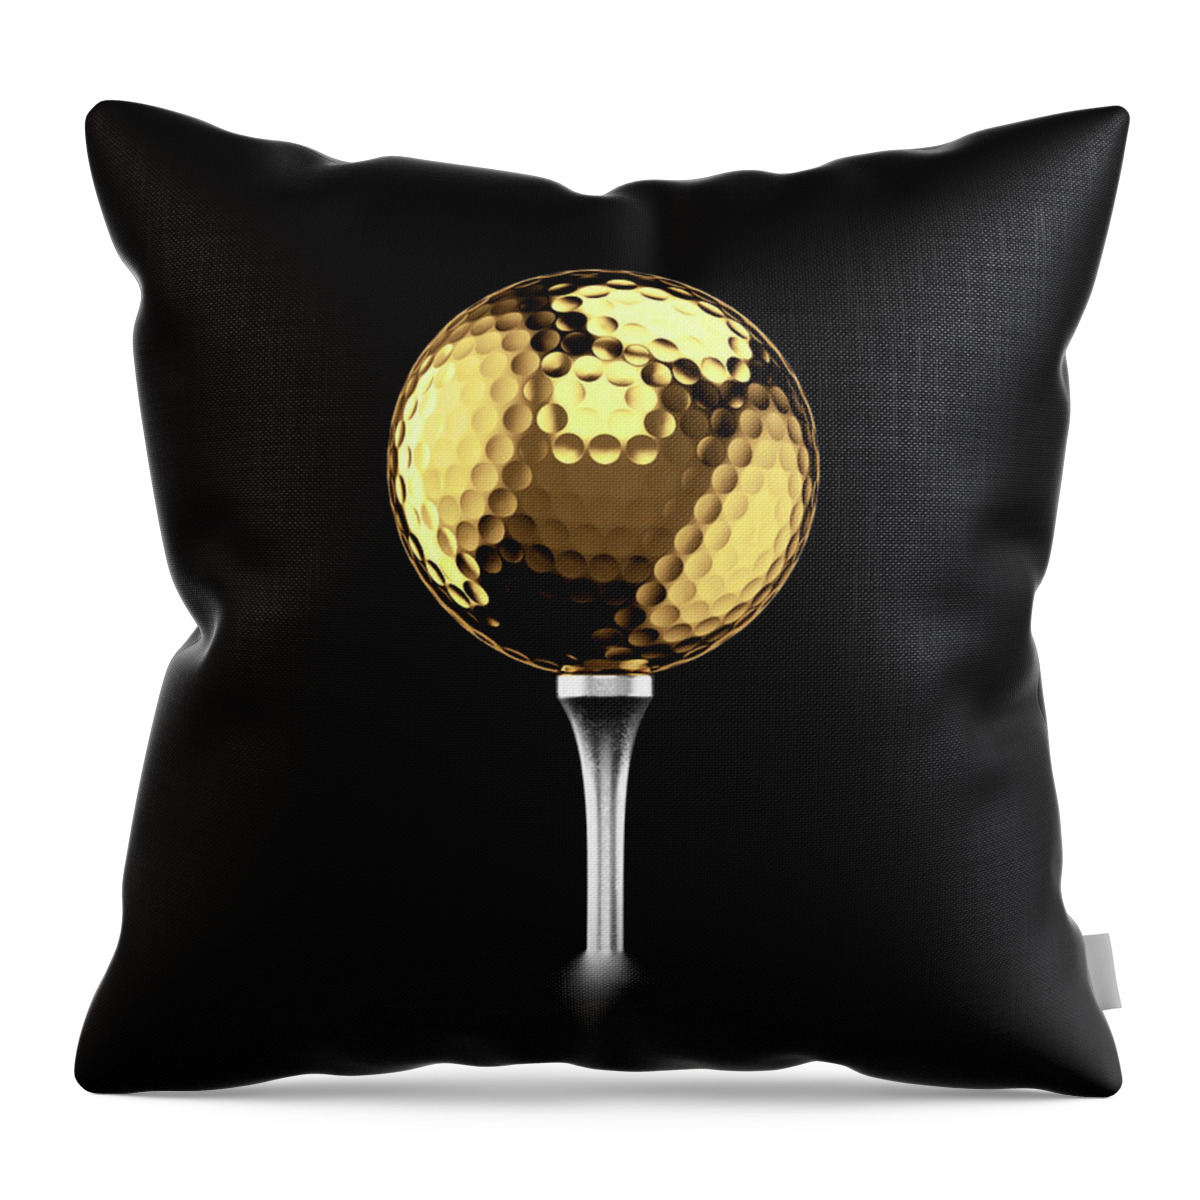 Two Objects Throw Pillow featuring the photograph Golfball And Alluminium Golf Tee by Atomic Imagery